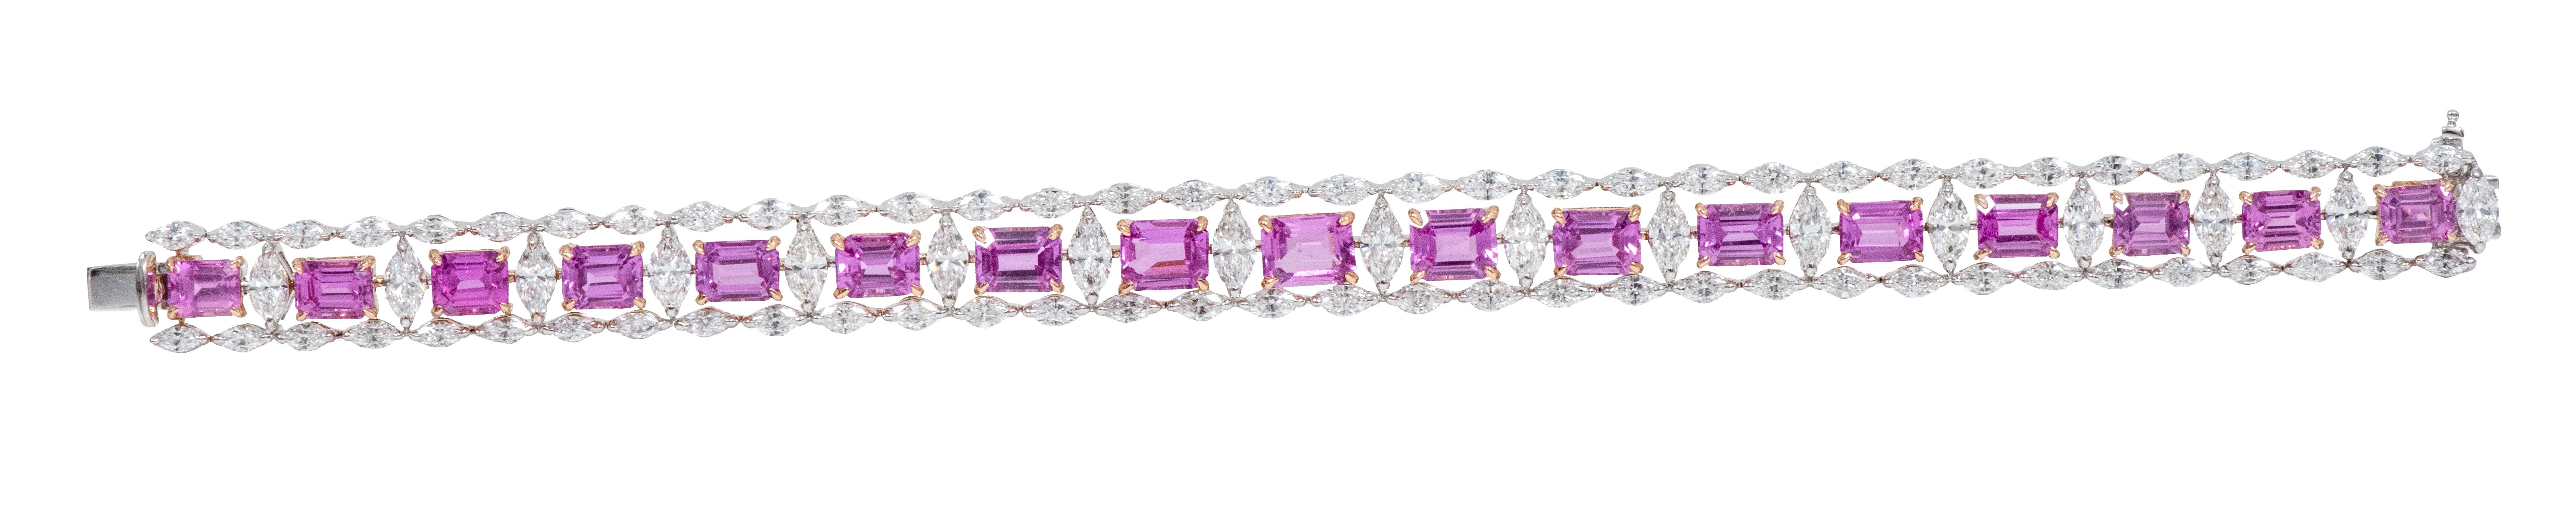 18 Karat Gold 24.80 Carat Pink Sapphire and Solitaire Diamonds Contemporary Style Bracelet

This impressive vivid deep pink and diamond solitaire tennis bracelet is incredulous. The solitaire emerald cut horizontally placed pink sapphires in rose